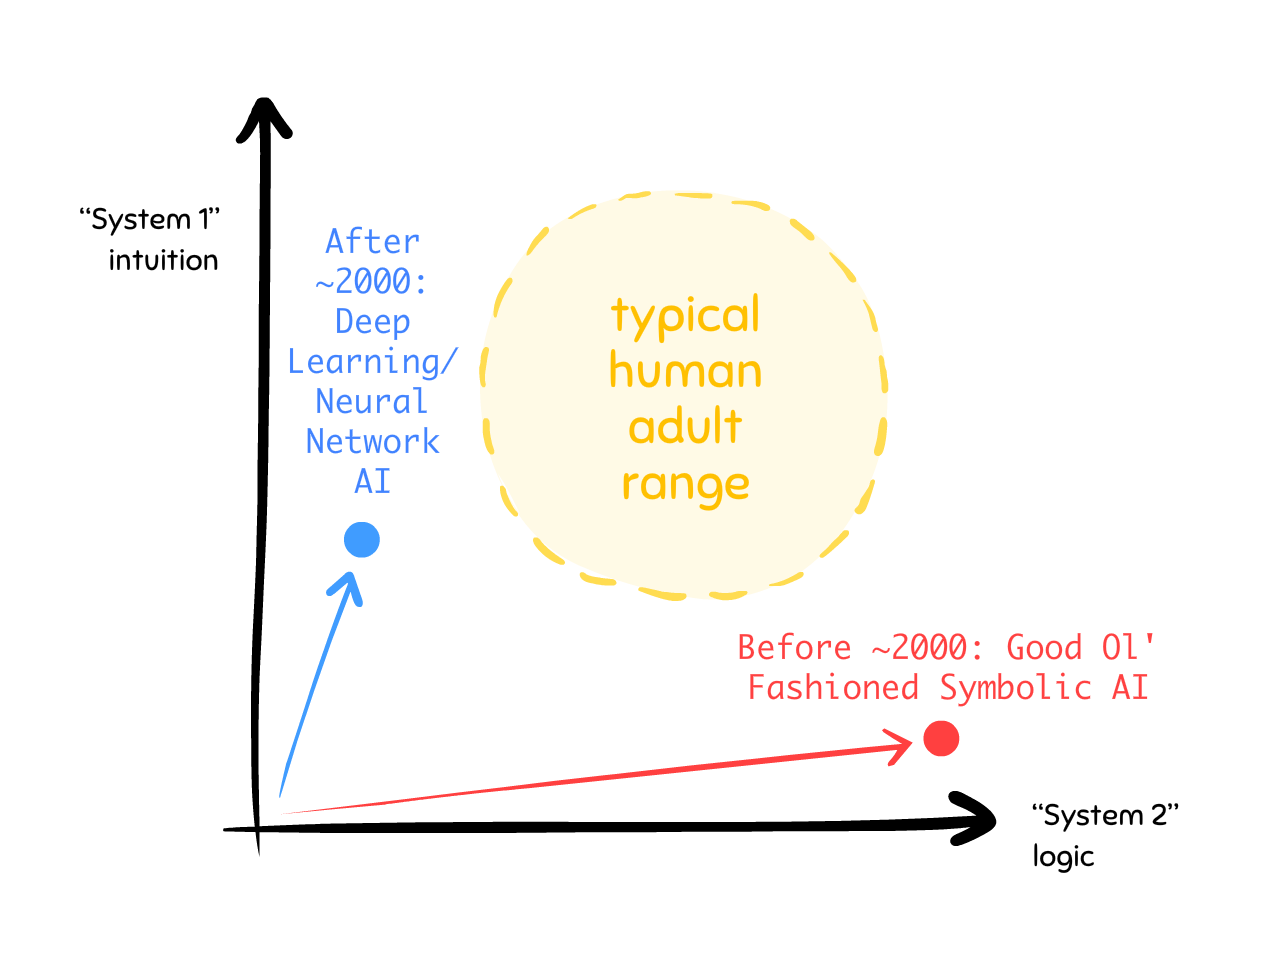 Same graph as before, but with two arrows showing the trajectories of Old Symbolic AI and New Deep Learning AI. Old Symbolic AI is all System 2, no System 1. Deep Learning is lost of System 1, little System 2. Both arrow-trajectories are missing the "typical human adult range".